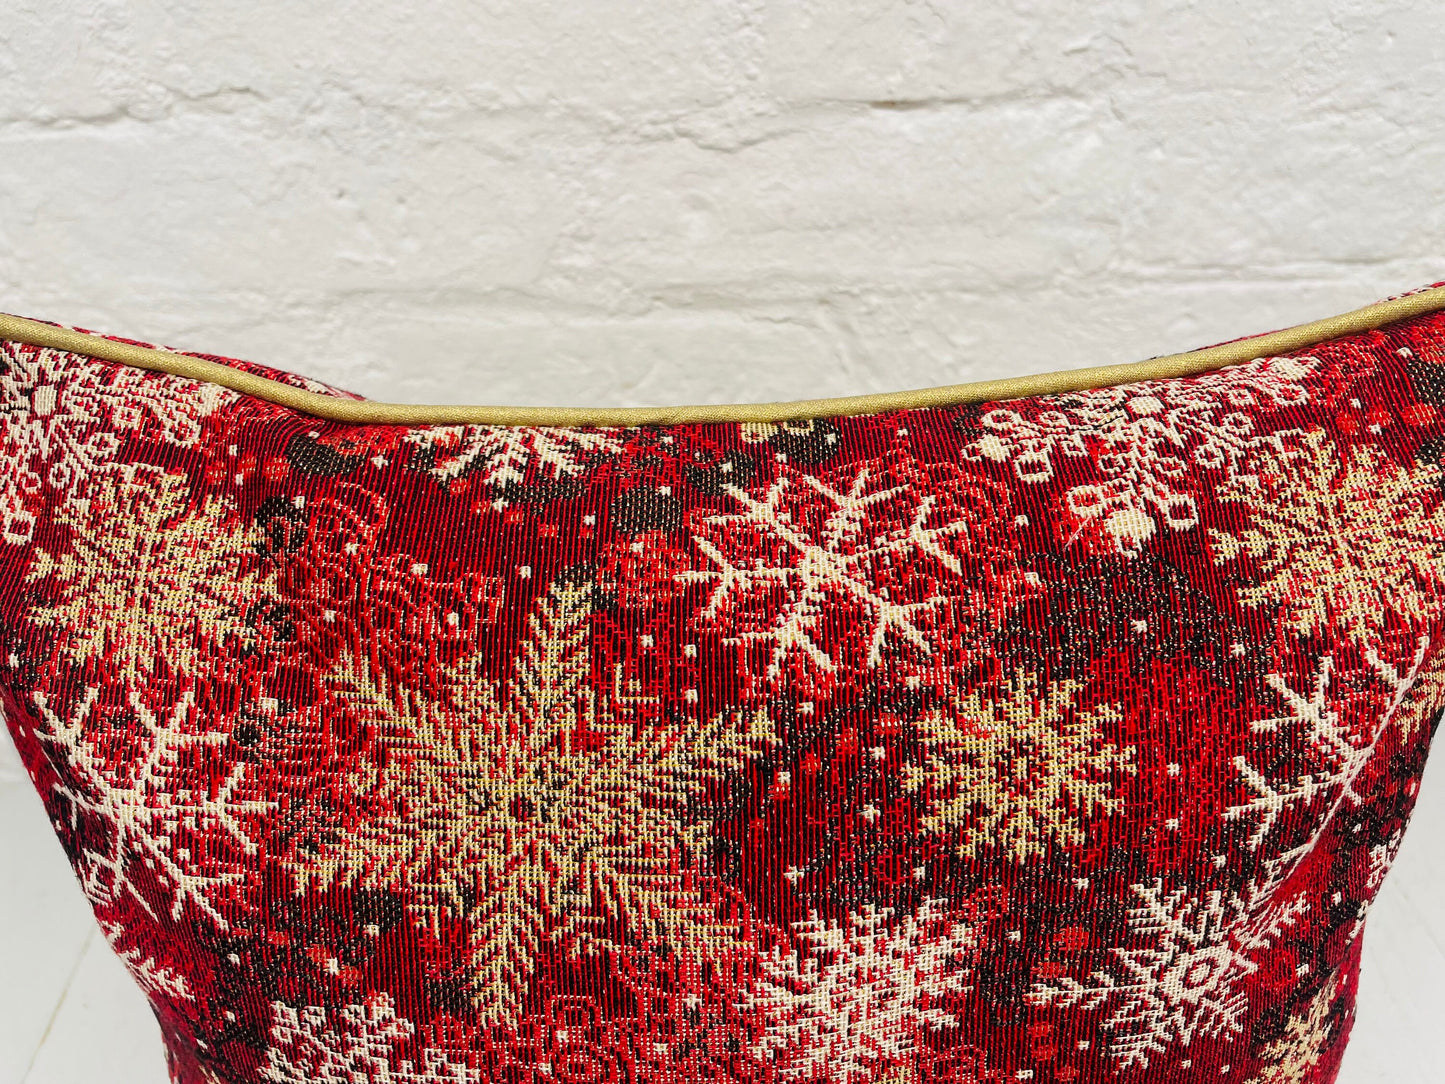 Snowflake Cushion with gold piping- Red and Gold Luxe Tapestry fabric